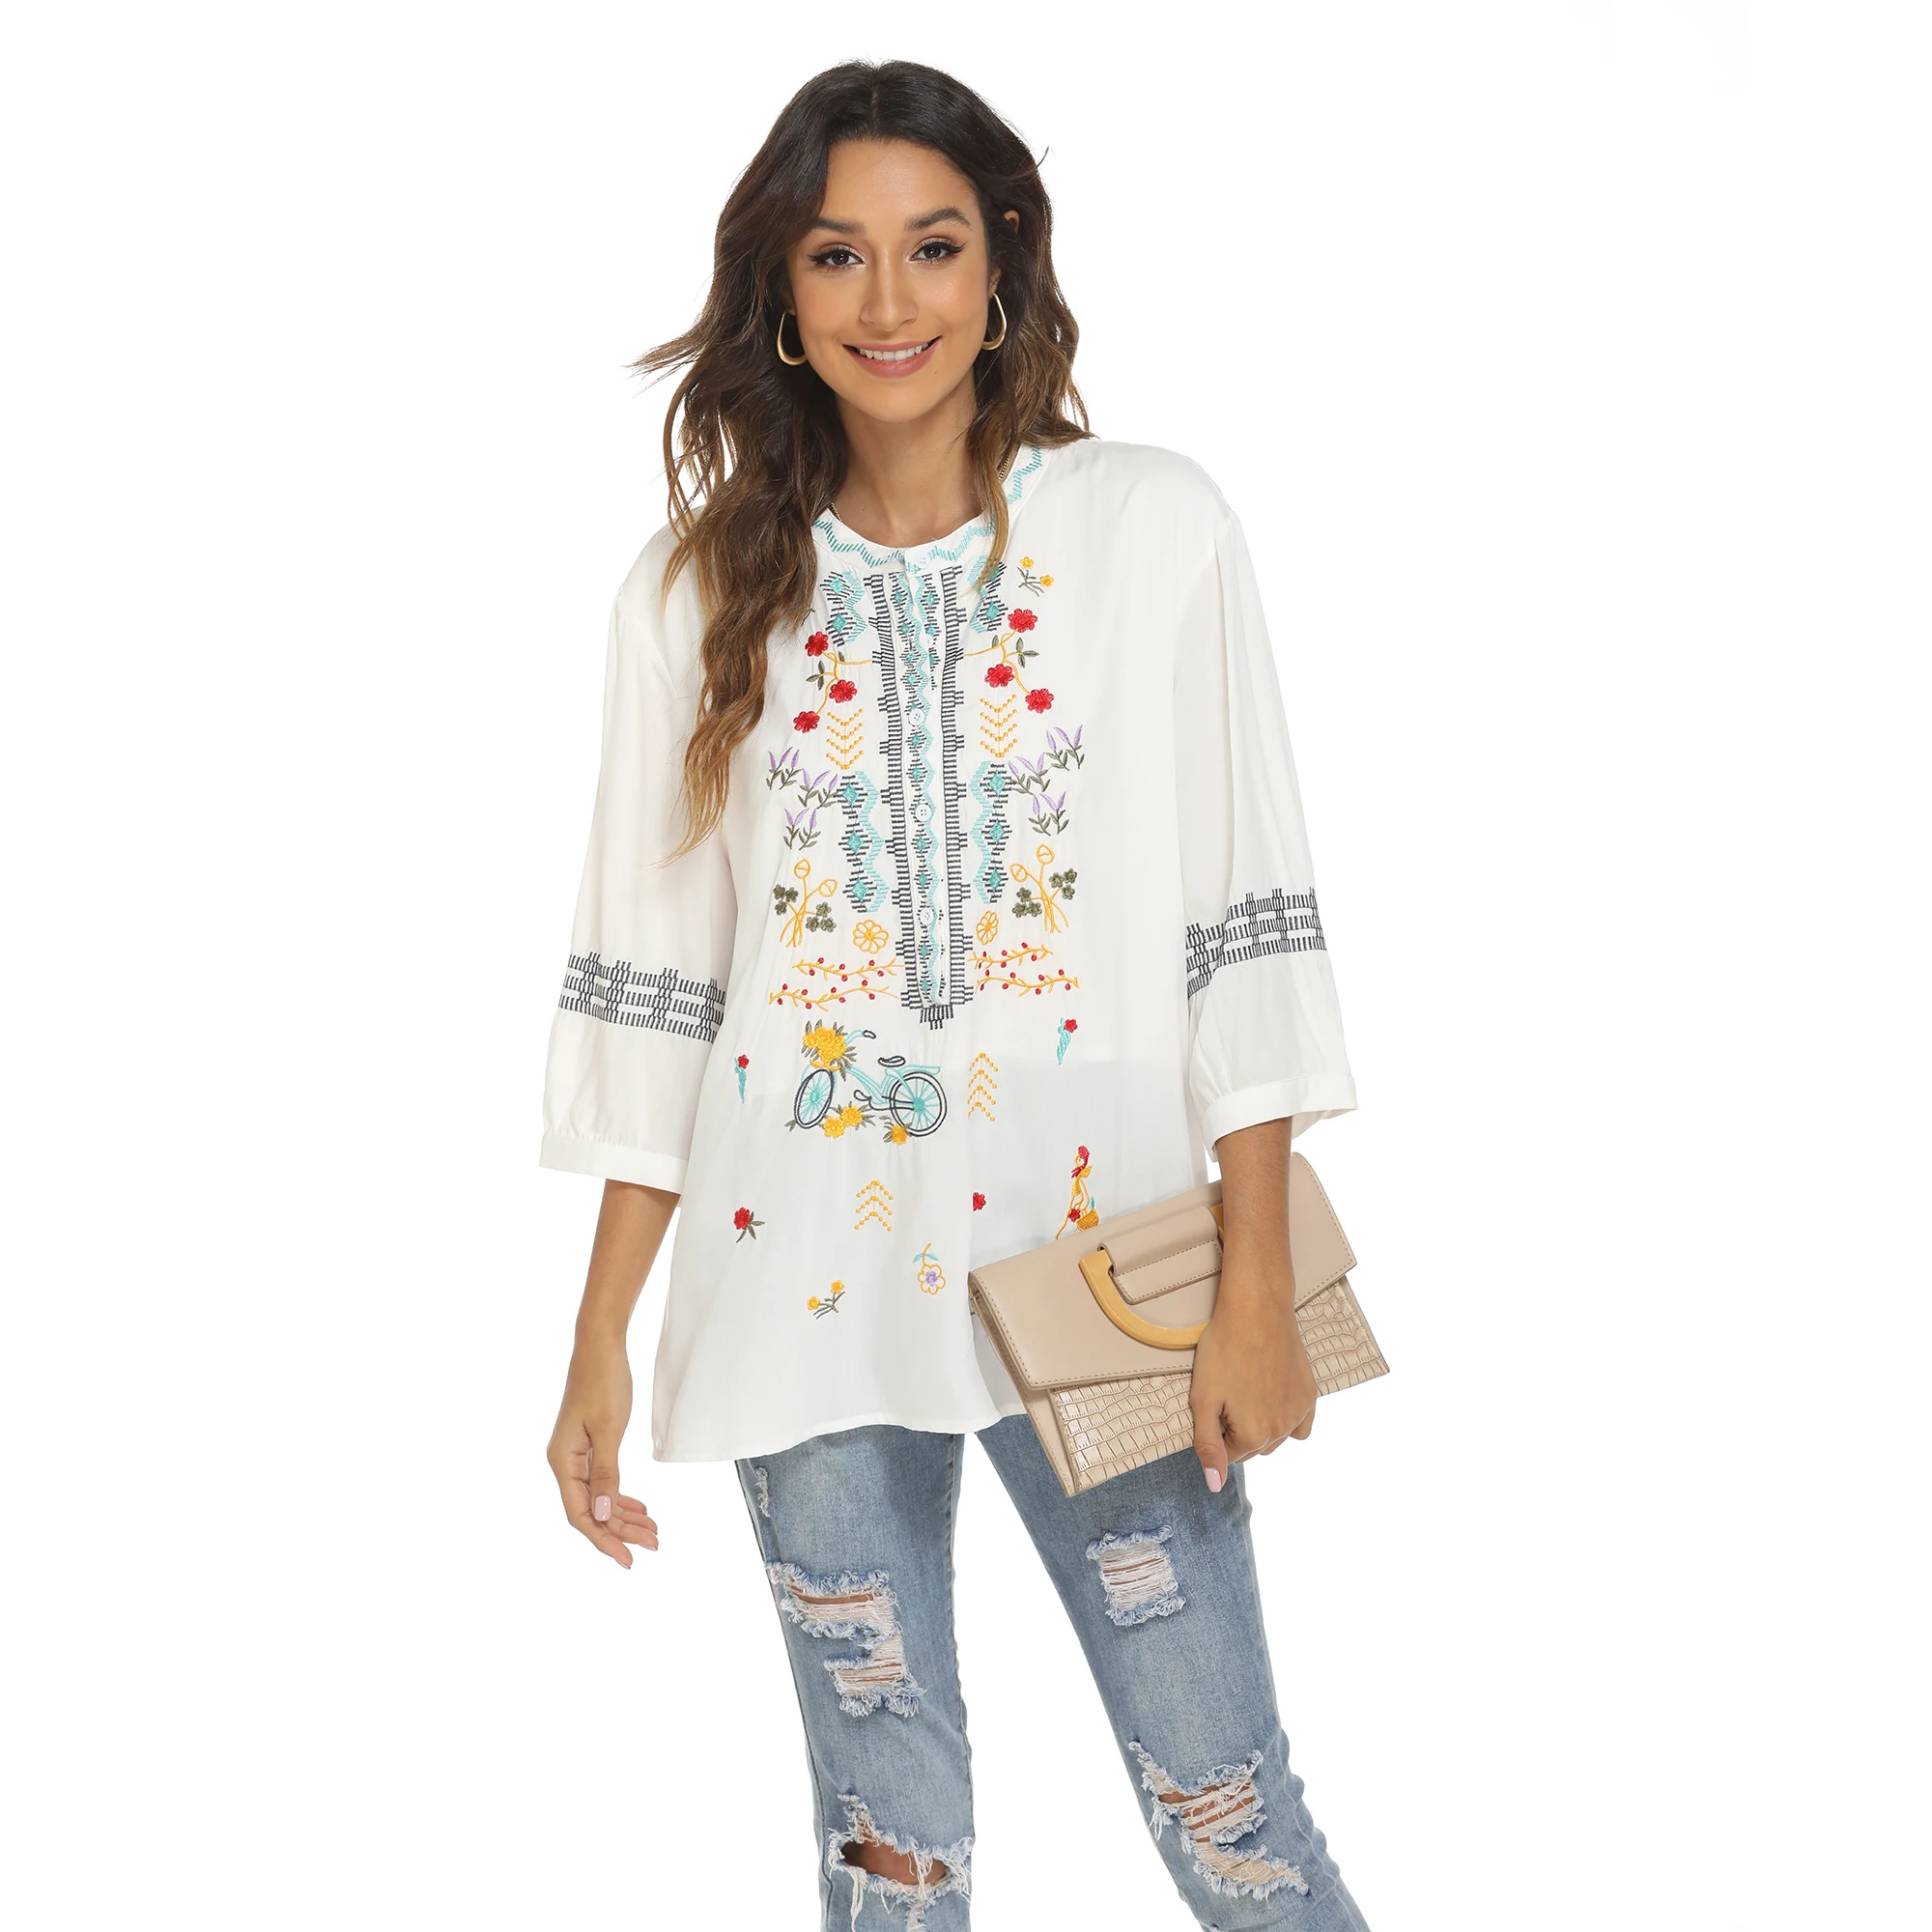 

Eaeovni Bohemian Embroidered Tops for Women Cotton Peasant Shirts Boho Embroidered Loose Blouse